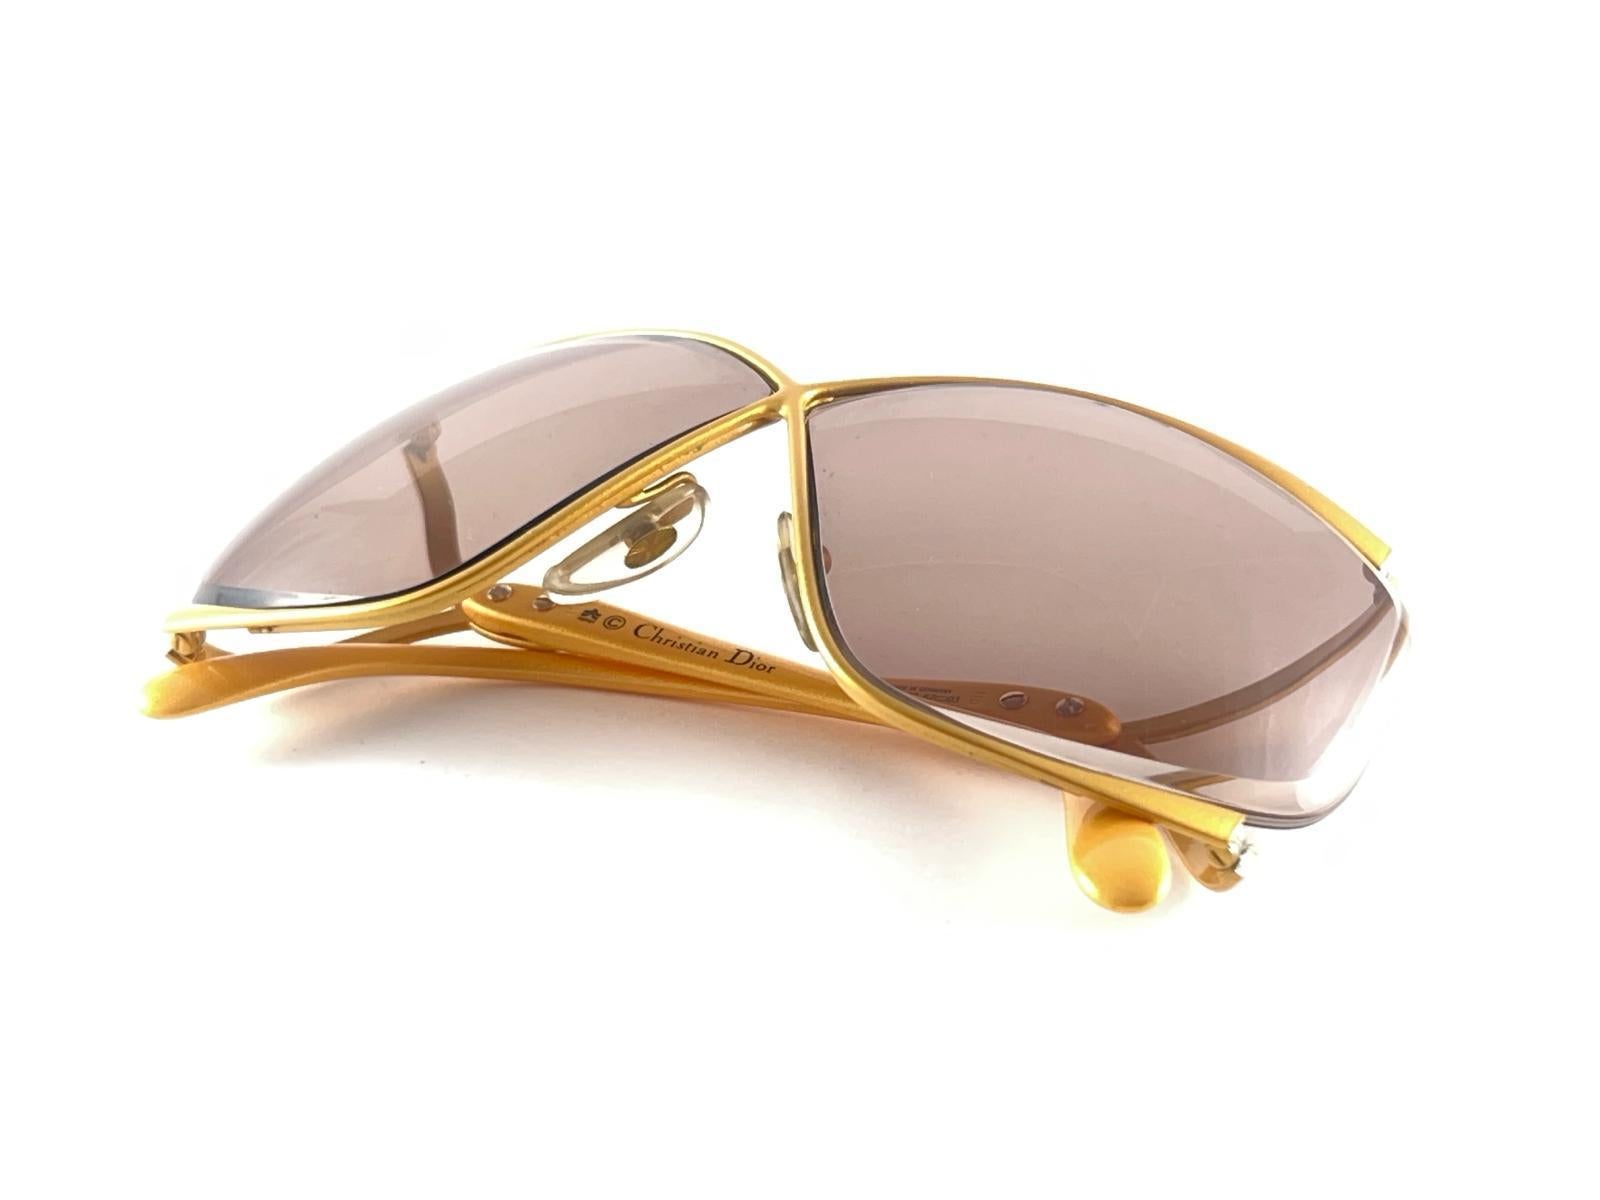 New Vintage Christian Dior 2056 40 Butterfly Mustard Sunglasses Made in Germany For Sale 11